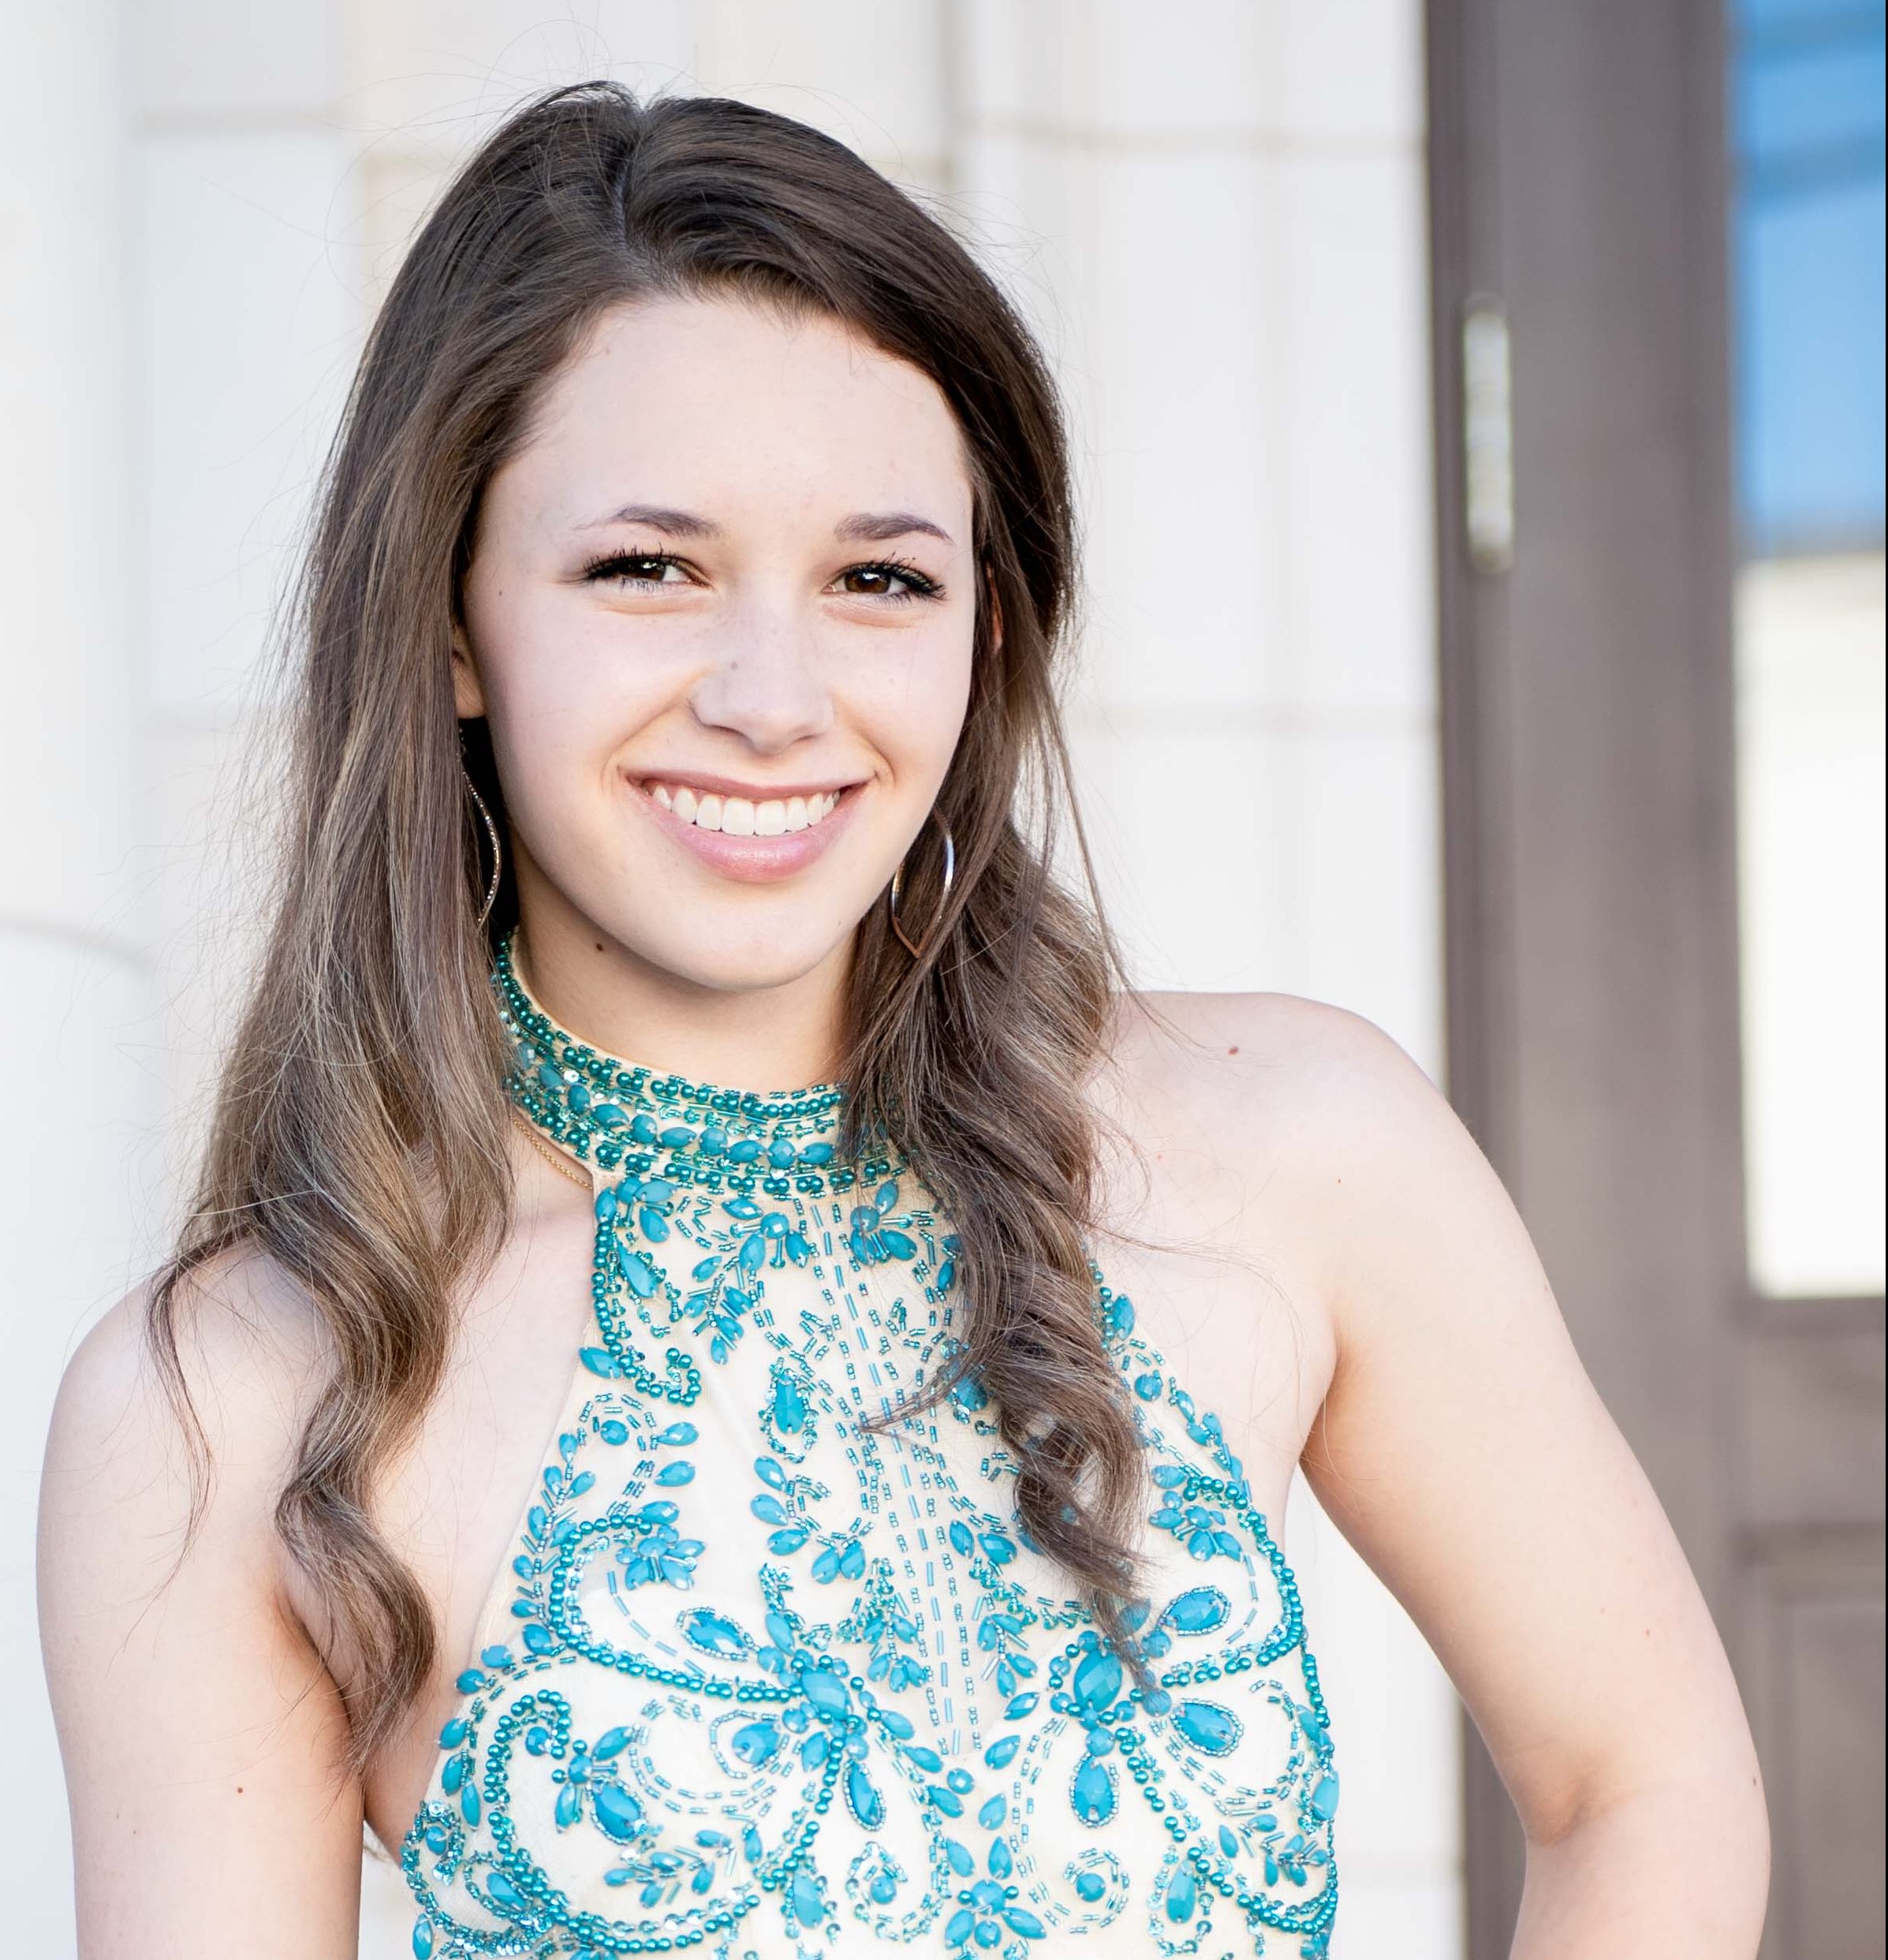 Meet Hopkins County Dairy Festival Pageant Contestant Katey Brown!